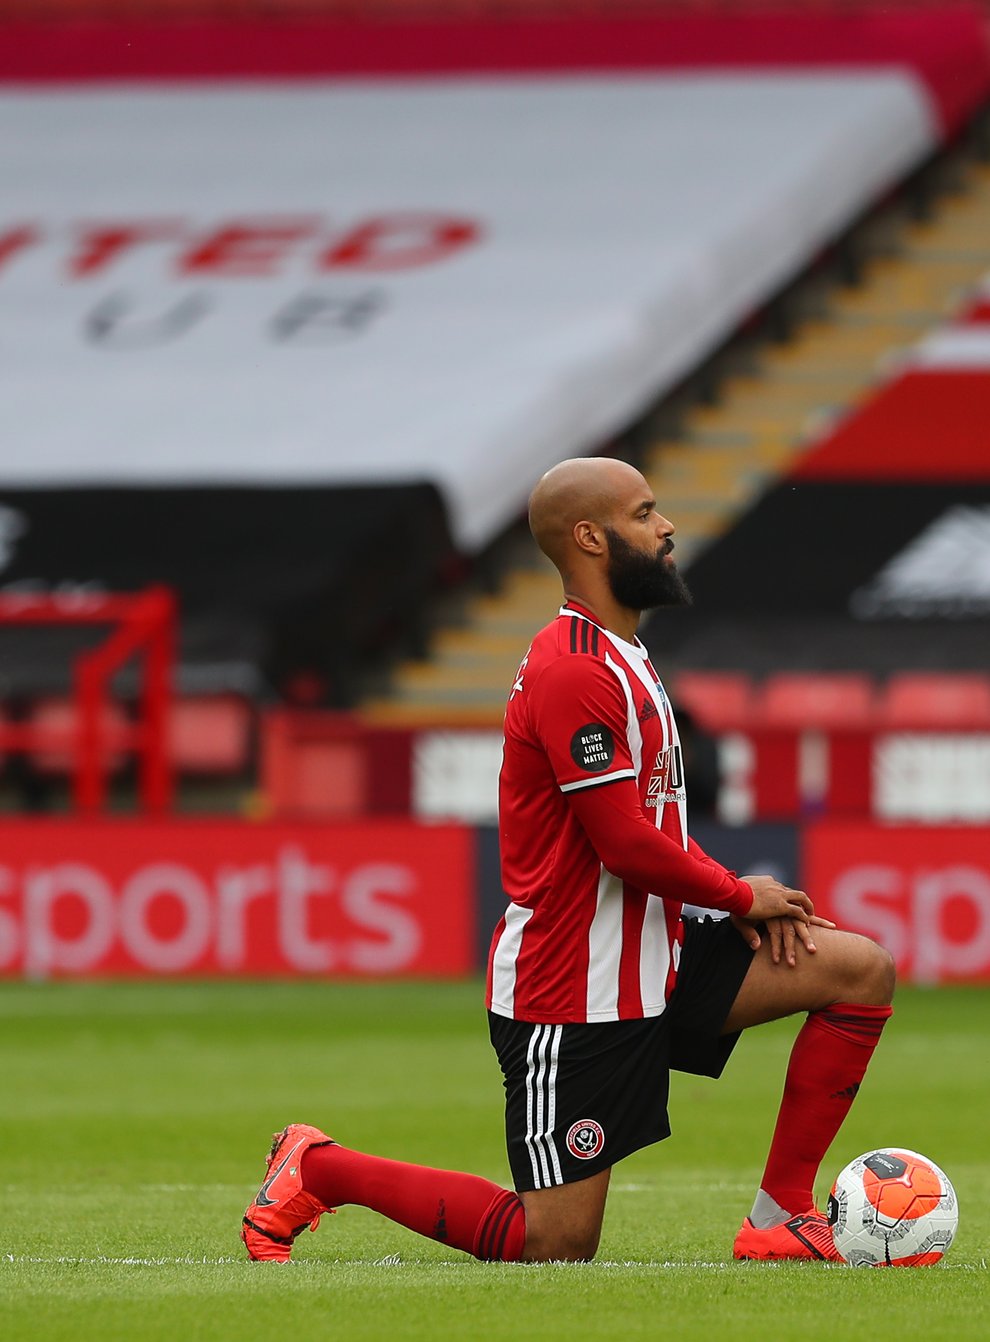 McGoldrick was subjected to racist abuse online after Sheffield United's win over Chelsea on Sunday